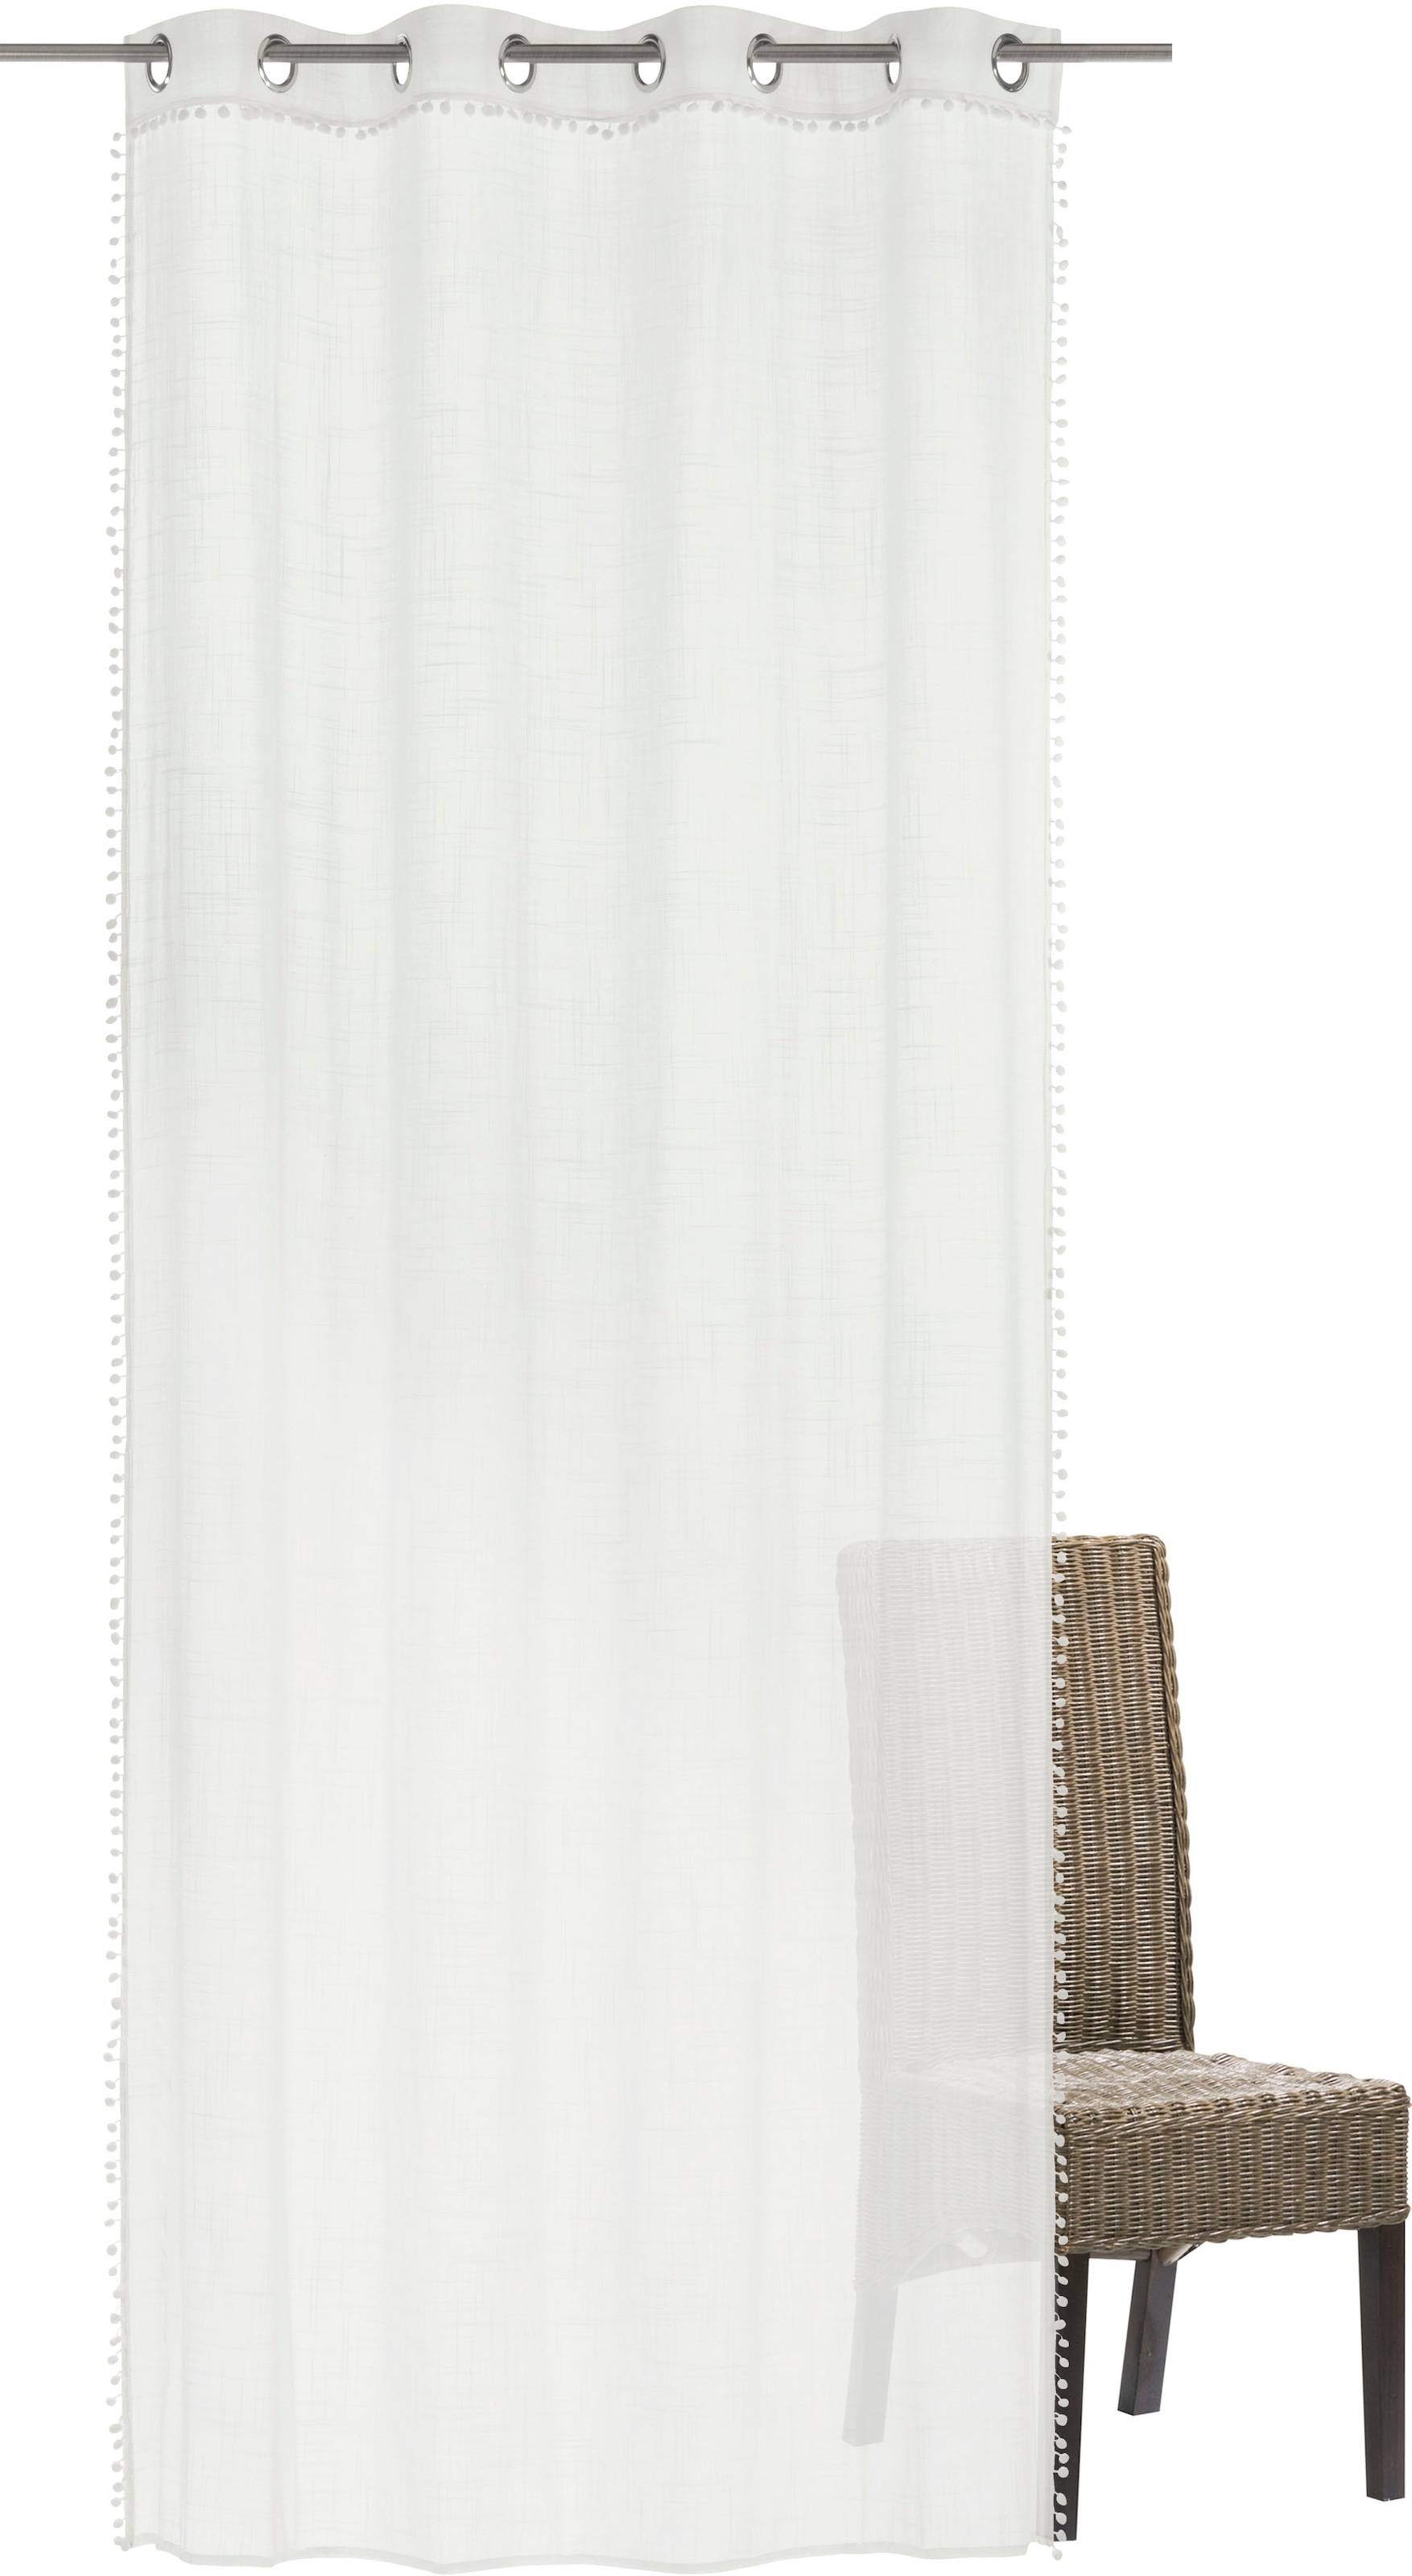 (1 Gardine bei Home OTTO Collection 00 »Natural offwhite«, Charme St.) freundin